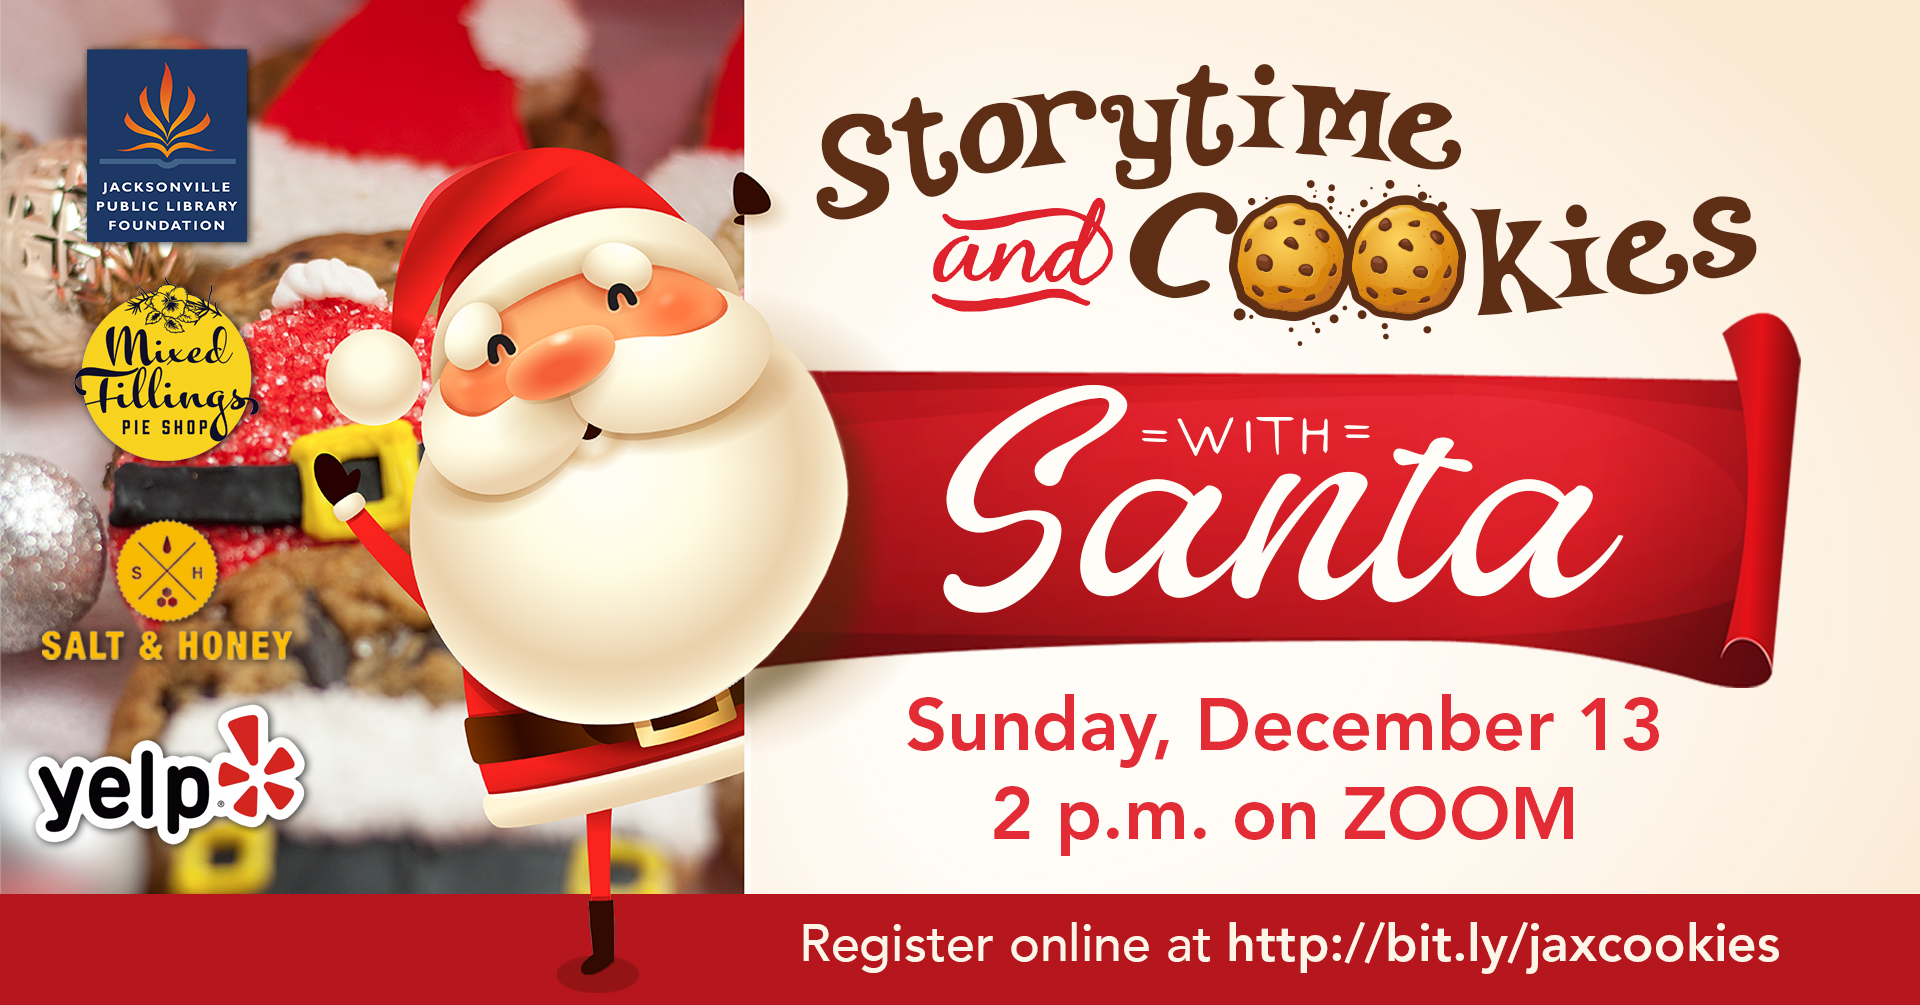 Storytime and Cookies with Santa Event